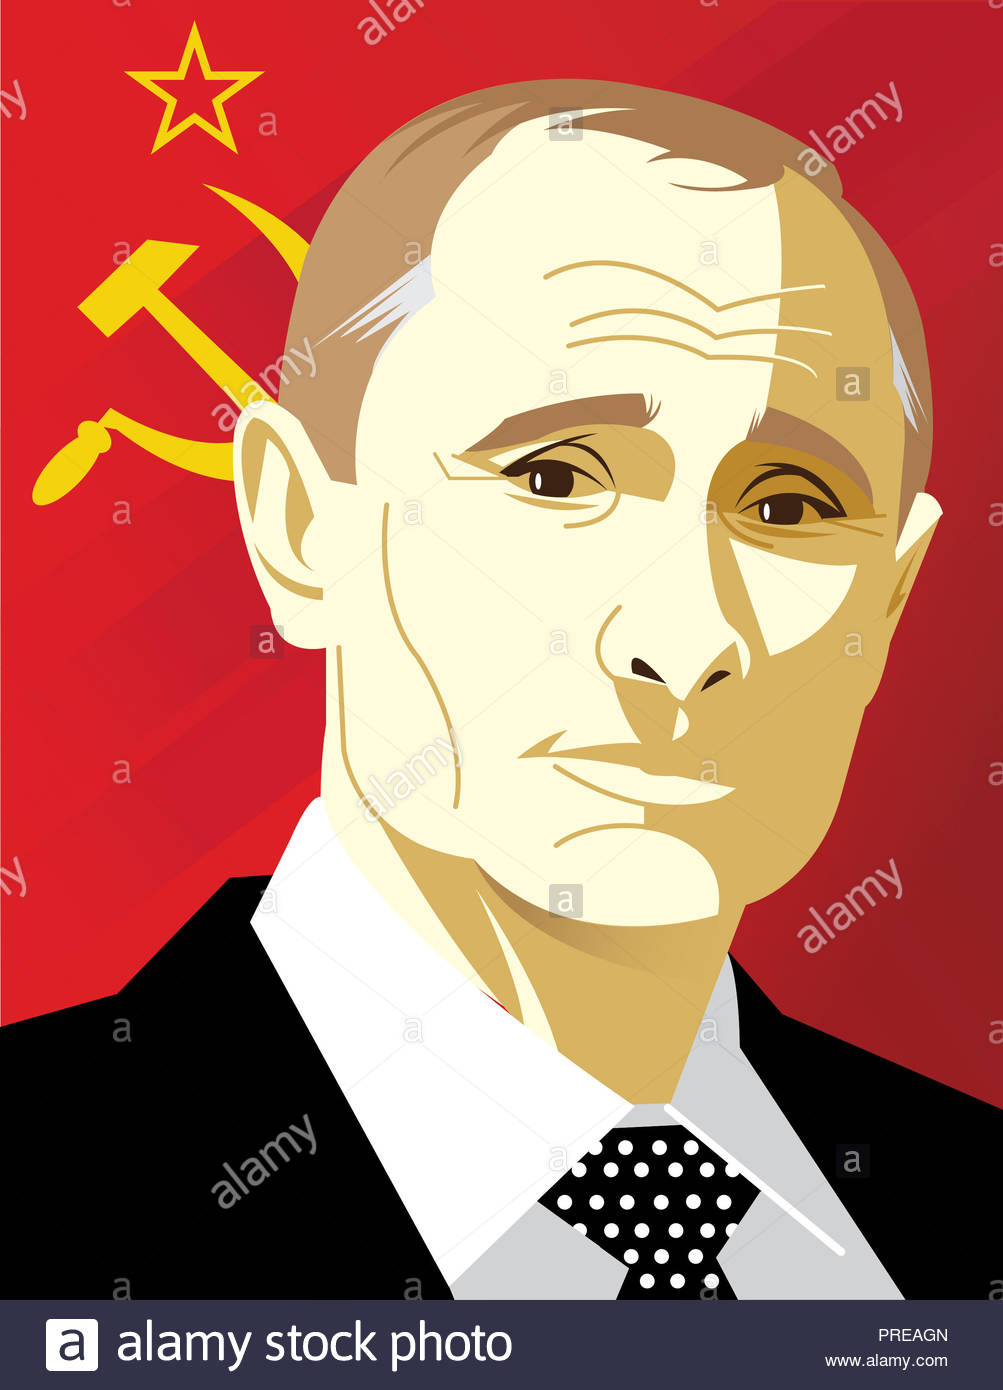 Free download Portrait of Vladimir Putin with russian flag in ...